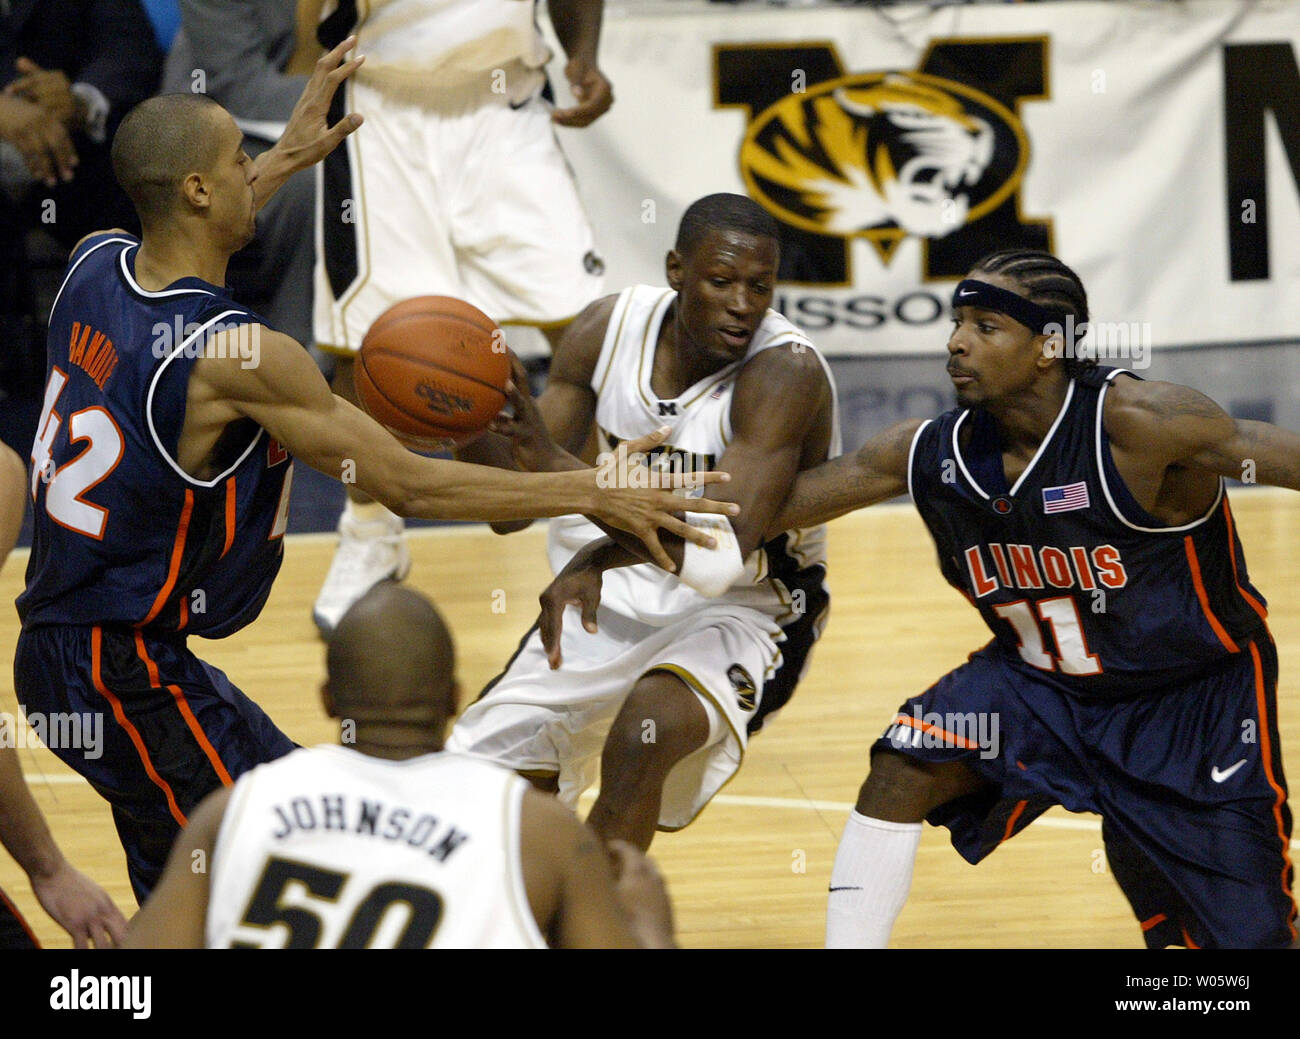 University of Missouri's Jimmy McKinney (C) loses control of the basketball in front of University of Illinois' Brian Randle (L) and Dee Brown (R) in the second half of the Annual Braggin Rights Game at the Savvis Center in St. Louis on December 23, 2003. (UPI Photo/Bill Greenblatt) Stock Photo